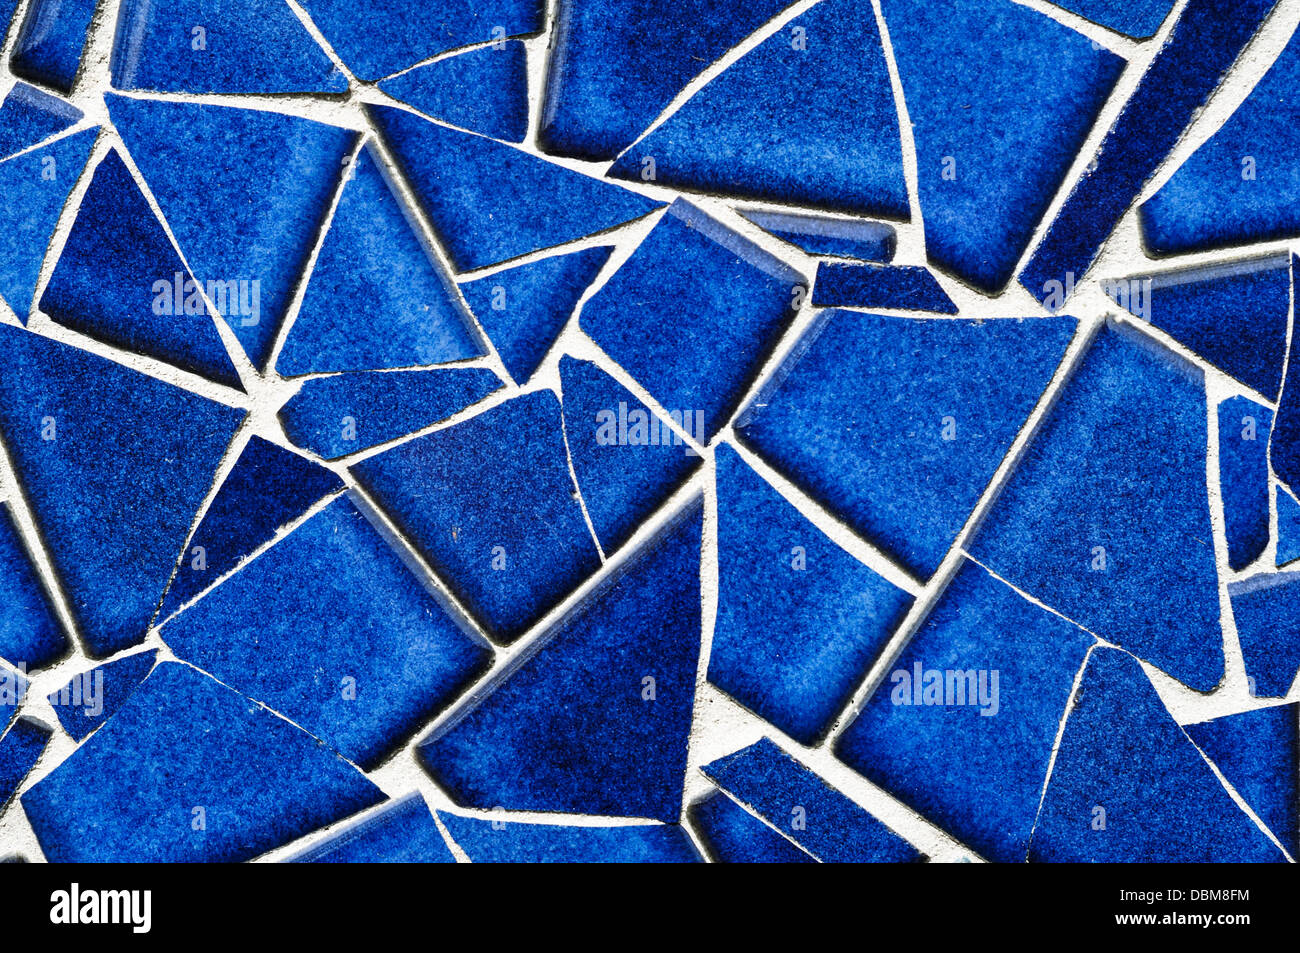 Abstract - Blue Tile Mosaic, Close-up Banque D'Images